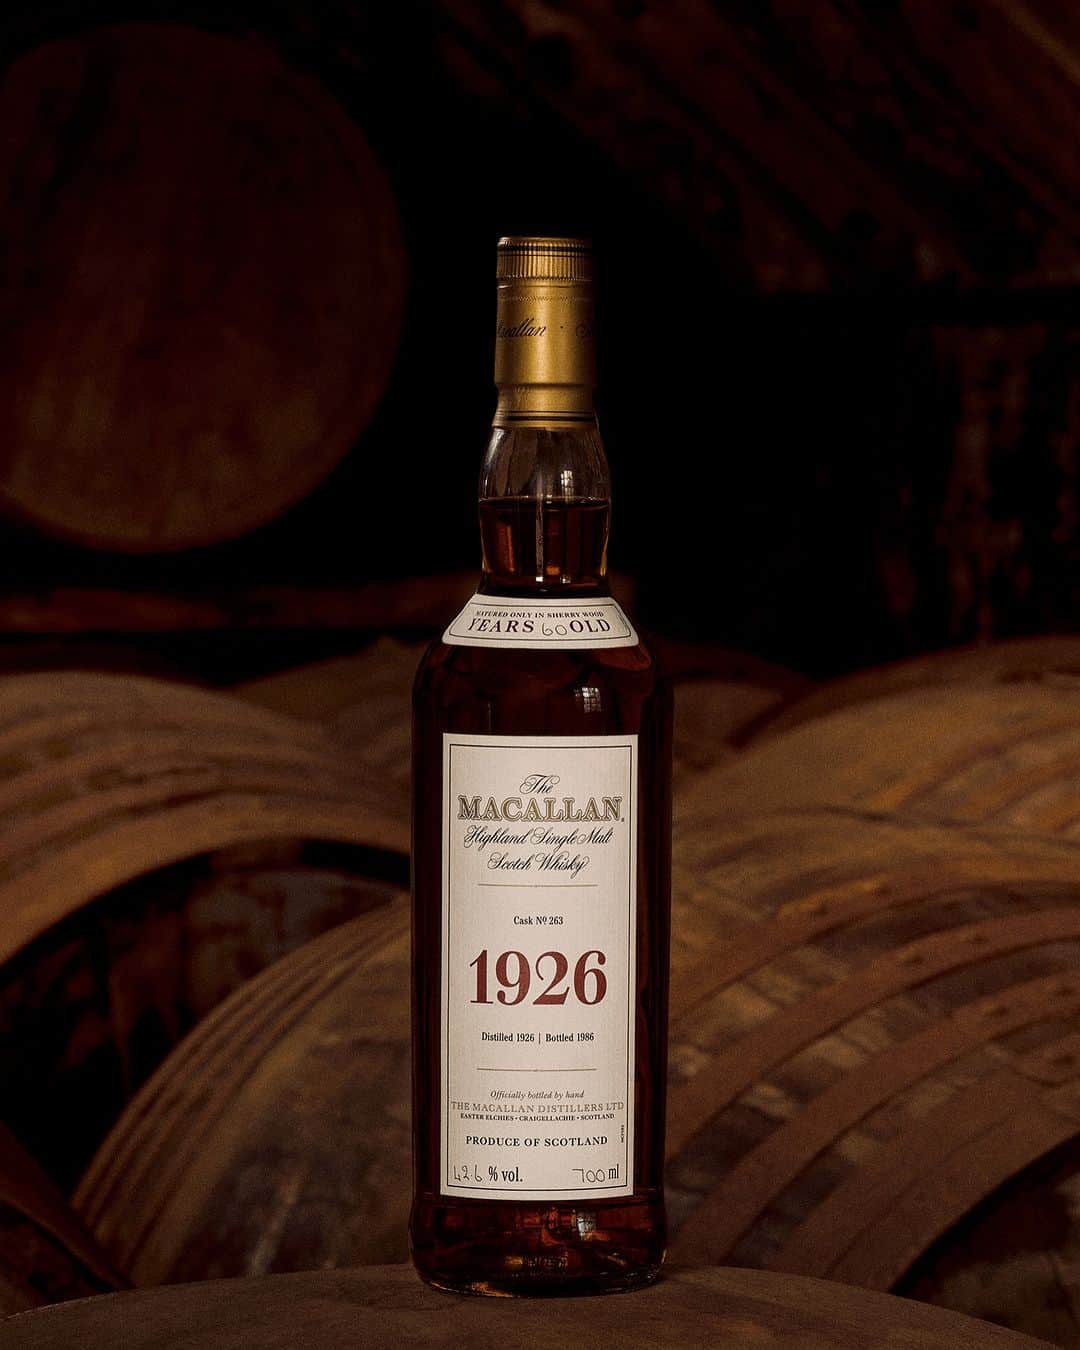 The Macallanのインスタグラム：「“The whisky had an incredible depth of character – rich dark fruits, black cherry compote alongside sticky dates, followed by intense sweet antique oak” - Kirsteen Campbell, Master Whisky Maker.   The Macallan 1926 is the legacy of Janet ‘Nettie’ Harbinson, our former Managing Director, encapsulated in a single, incomparable spirit. Nettie’s dedication to craftsmanship was instrumental in setting the foundations and making The Macallan what it is today.  Discover more via our link in bio.  Crafted without compromise. Please savour The Macallan responsibly.  #TheMacallan #TheSpiritof1926 #TheMacallanFineandRare」